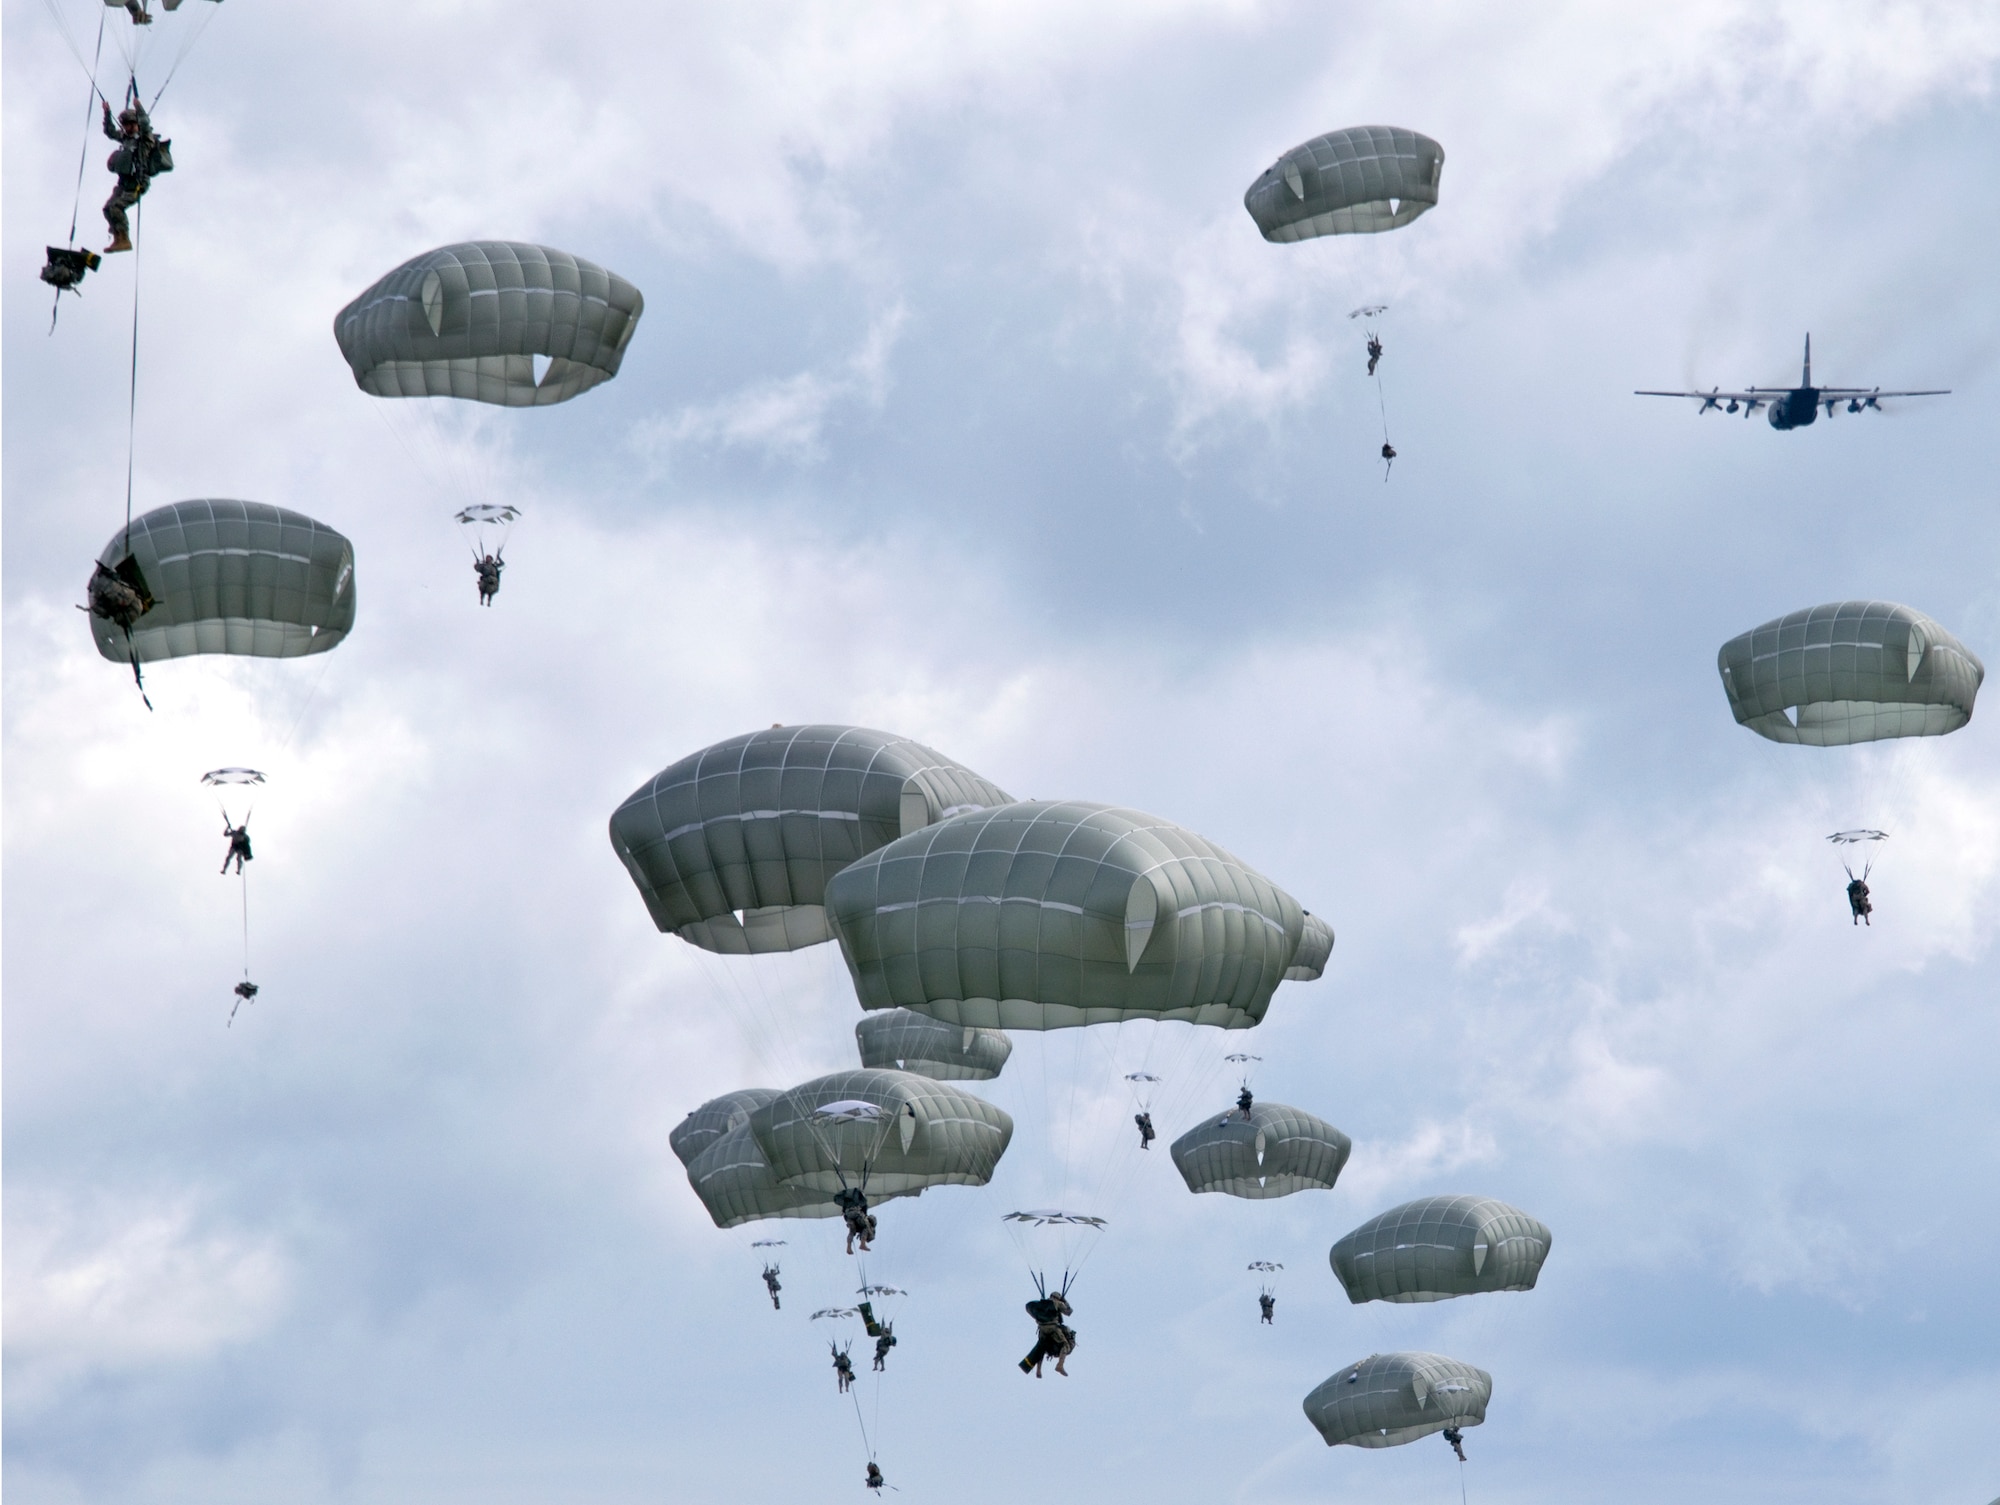 Paratroopers with the 4th Infantry Brigade Combat Team (Airborne), 25th Infantry Division jump from an Alaska Air National Guard C-130 Hercules on Joint Base Elmendorf-Richardson, Alaska, as part of a Joint Force Entry Exercise on June 7, 2014. The six-day exercise involved over 1,500 personnel including active duty Army, Air Force and Air National Guard. (U.S. Air National Guard Photo by Capt. John Callahan/ Released)